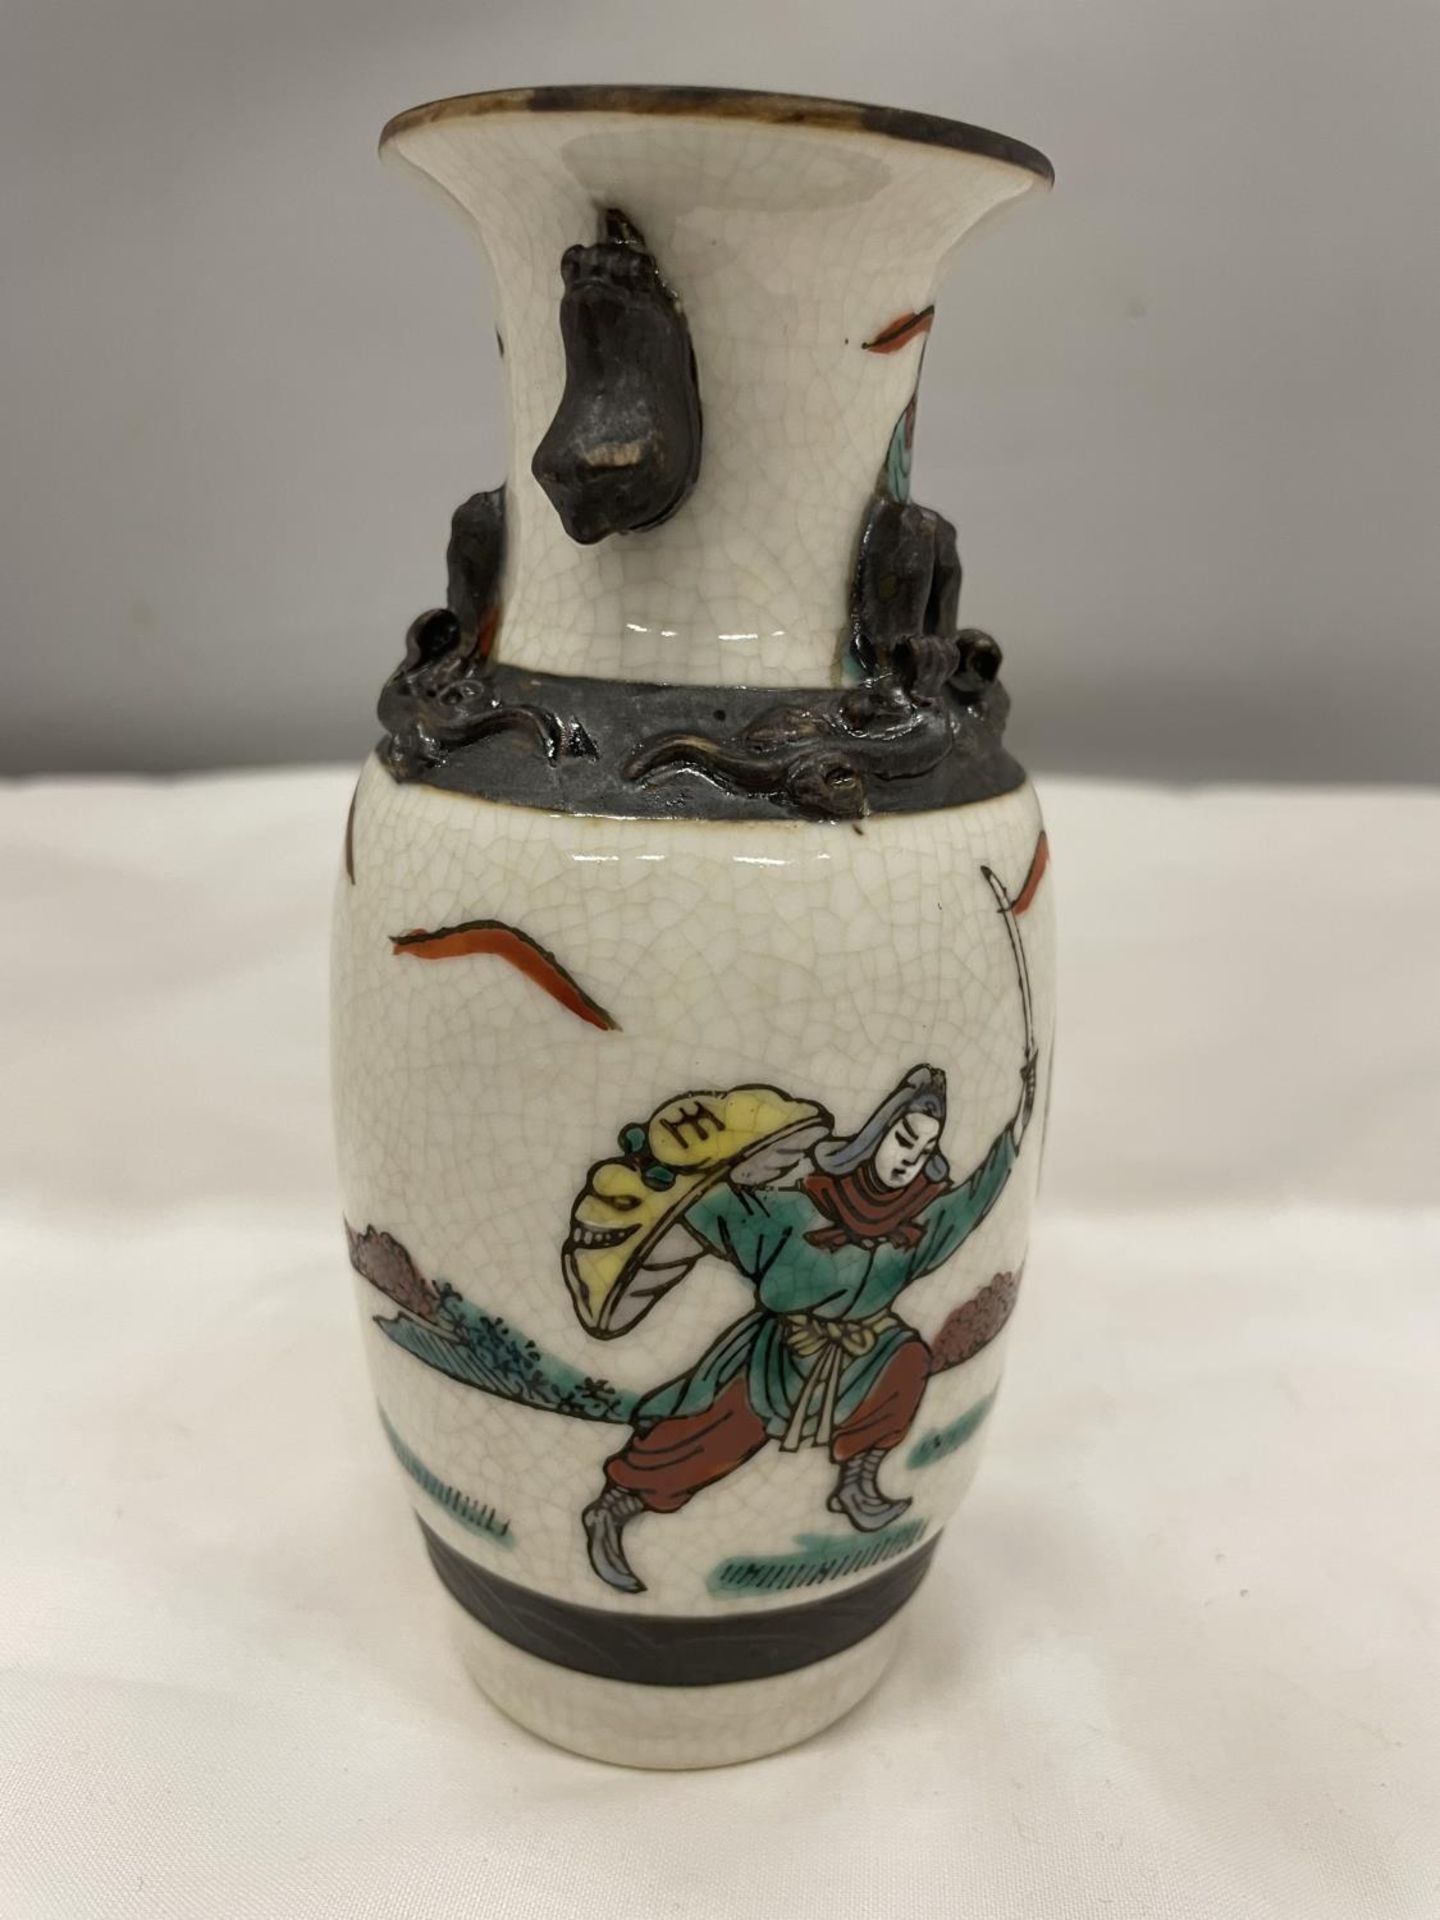 A CRACKLE GLAZE CHINESE VASE DEPICTING WARRIORS IN BATTLE - Image 2 of 6